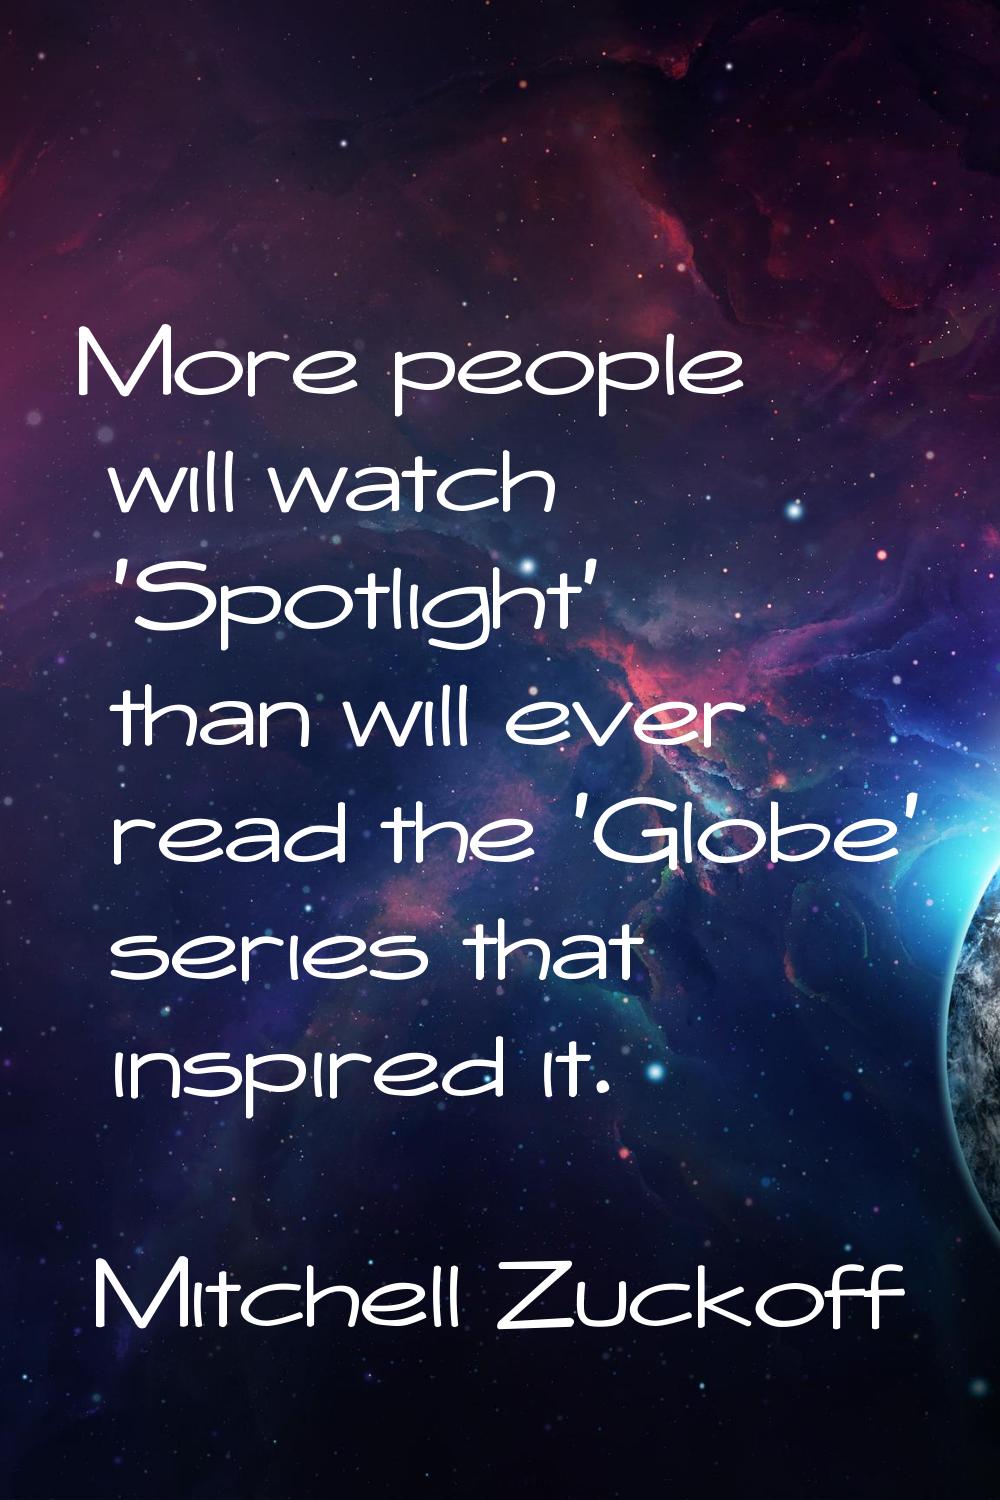 More people will watch 'Spotlight' than will ever read the 'Globe' series that inspired it.